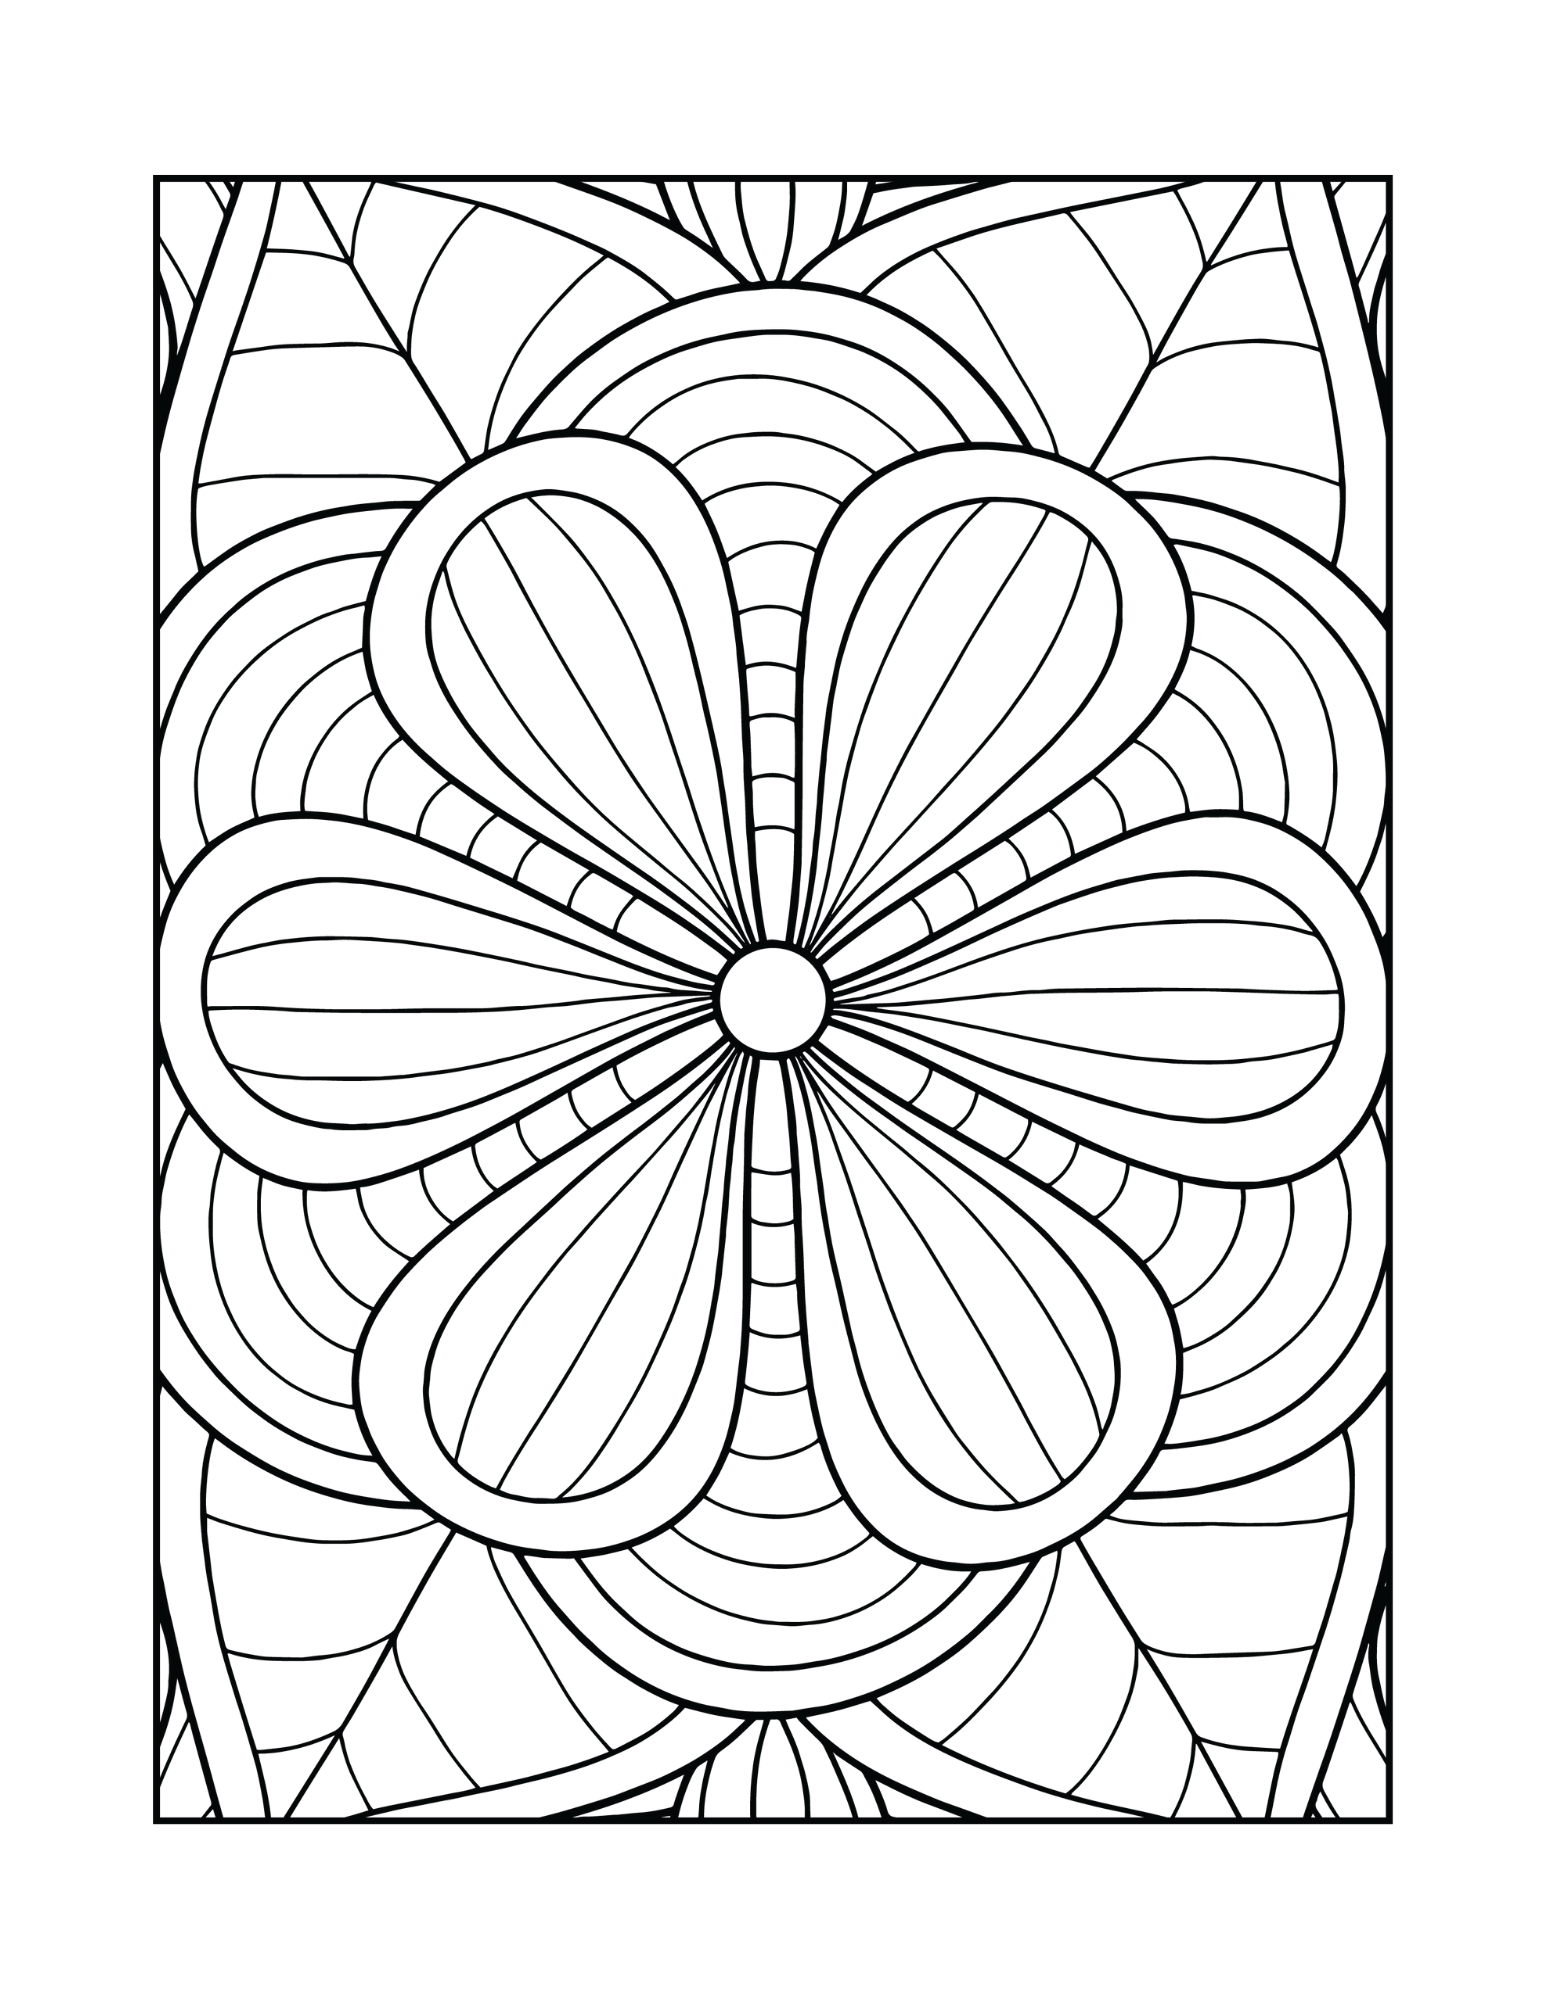 How to Draw MANDALA Adult Tracing Book : Stress Relieving Mandala Designs  (Trace Along) by Blossom Notebooks (2019, Trade Paperback) for sale online